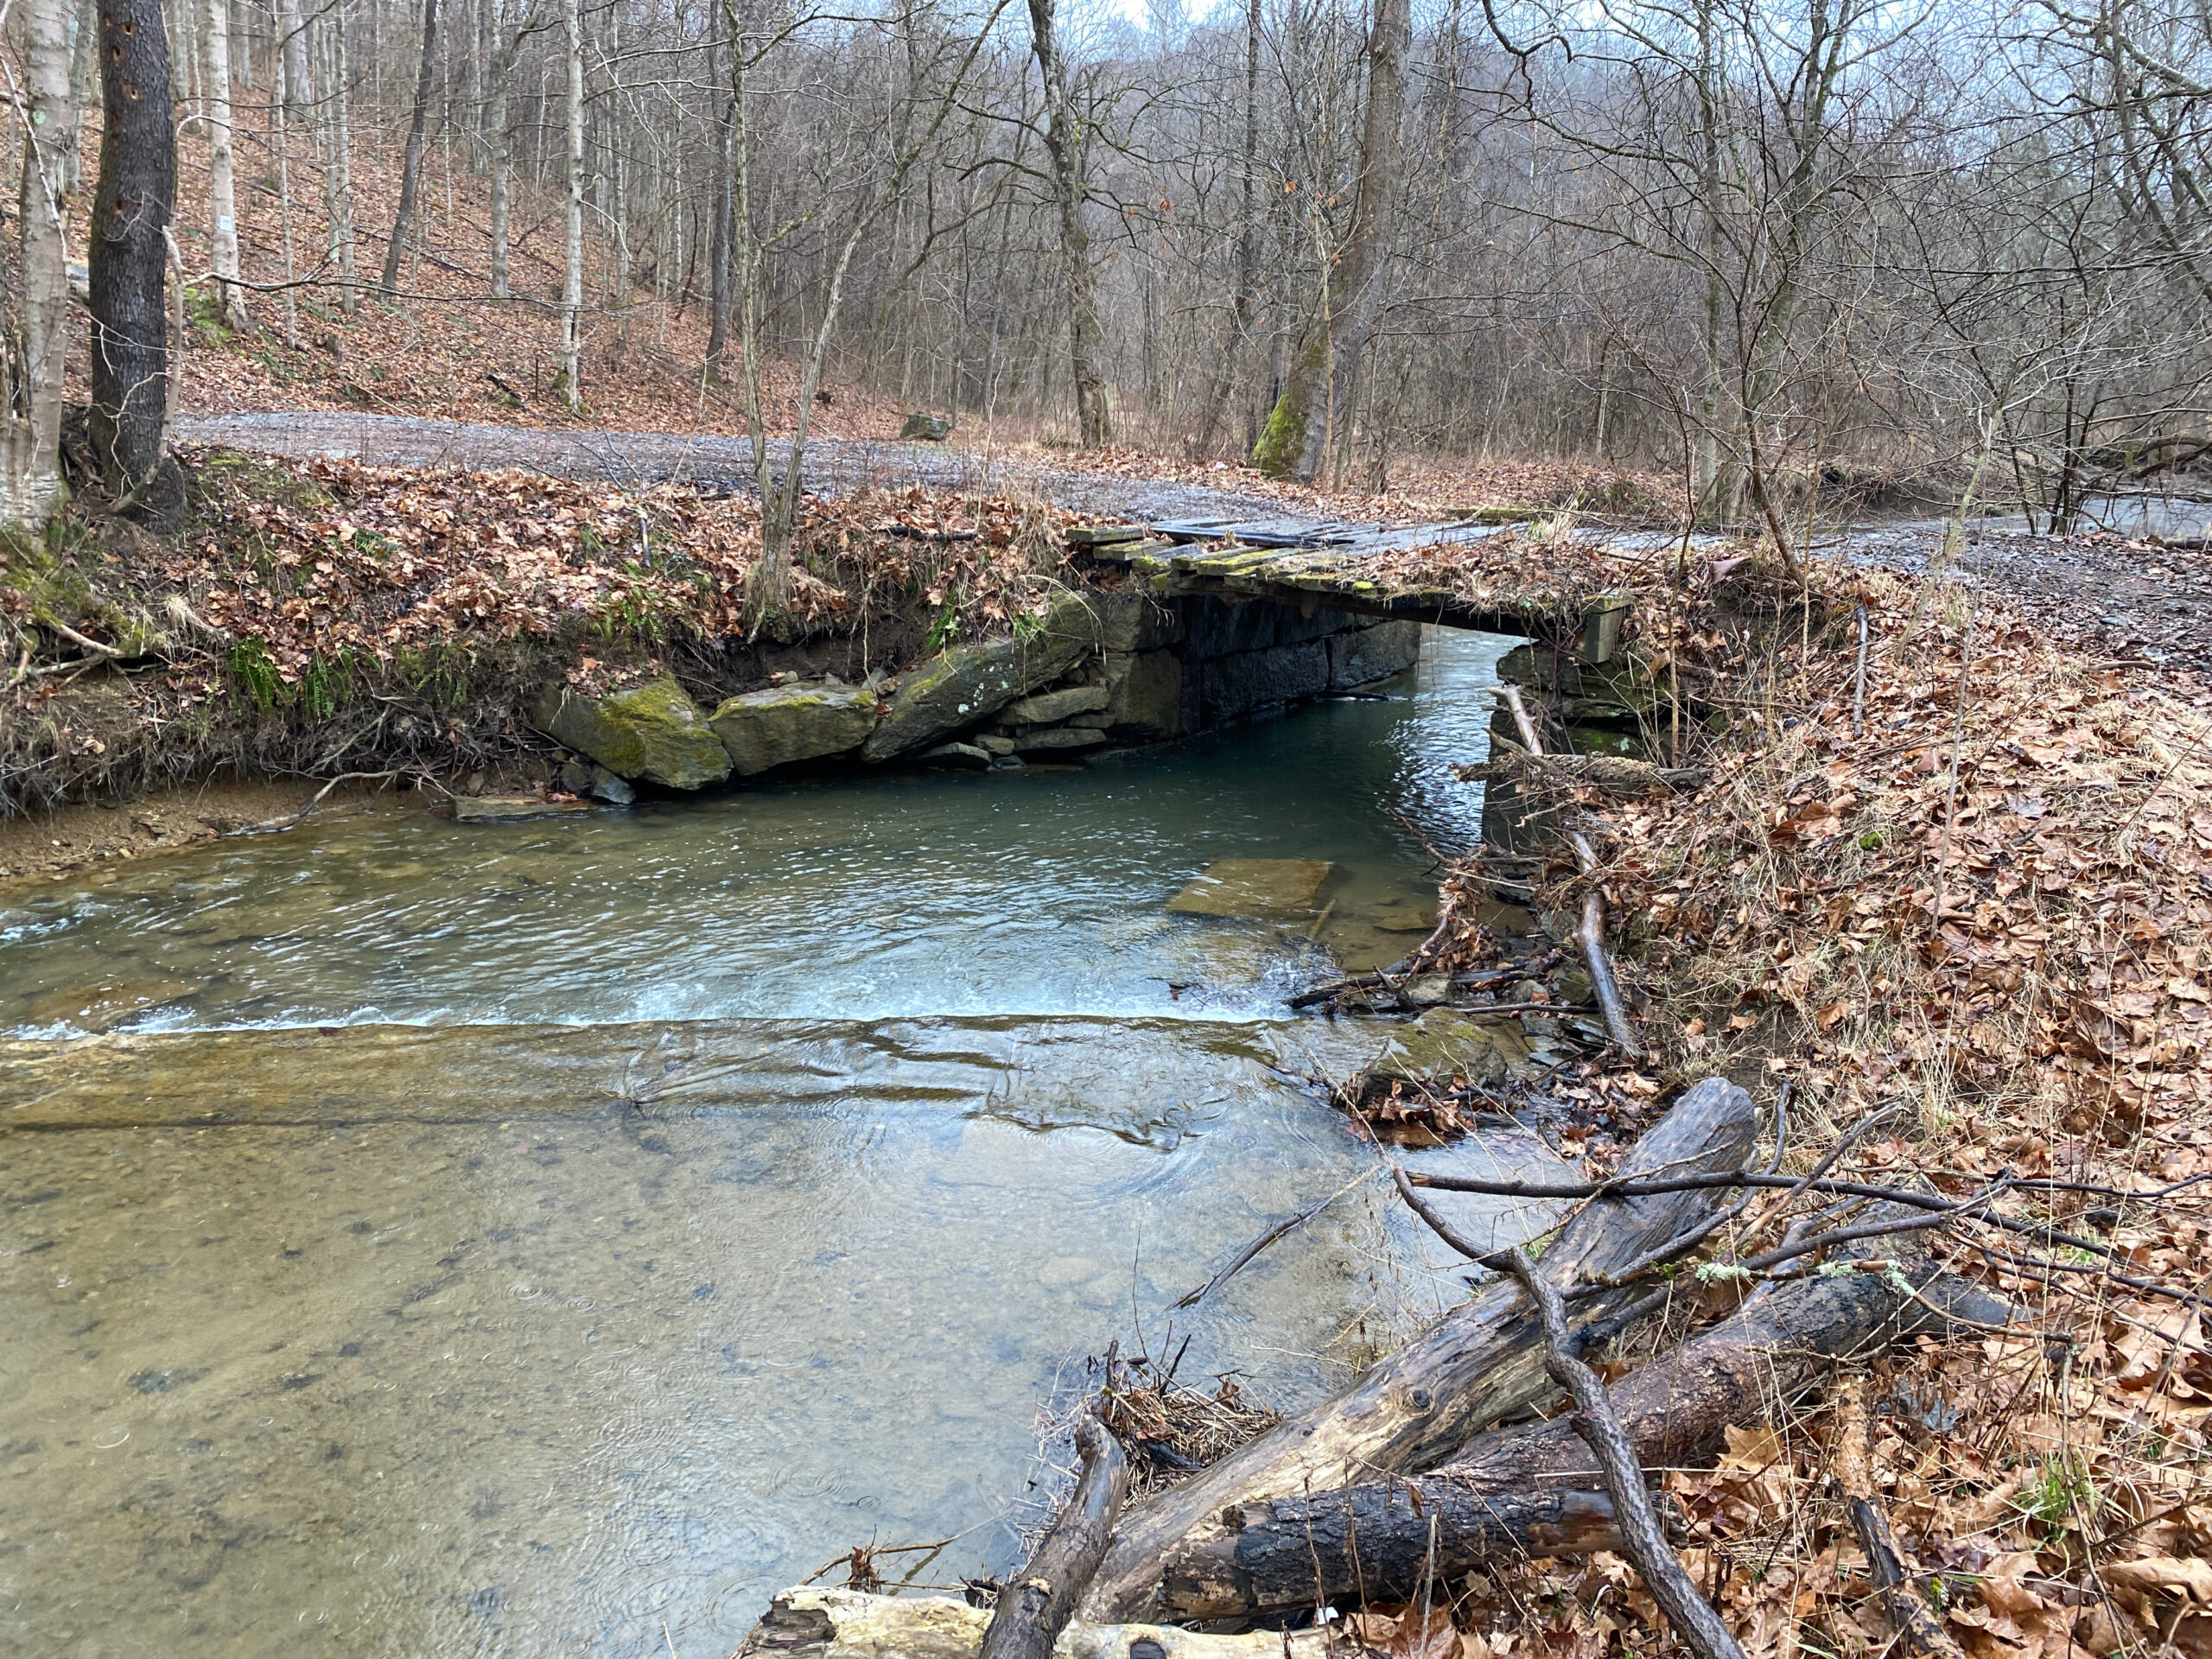 WVU conservation team recognized for efforts in rare fish conservation, Davis College of Agriculture, Natural Resources and Design